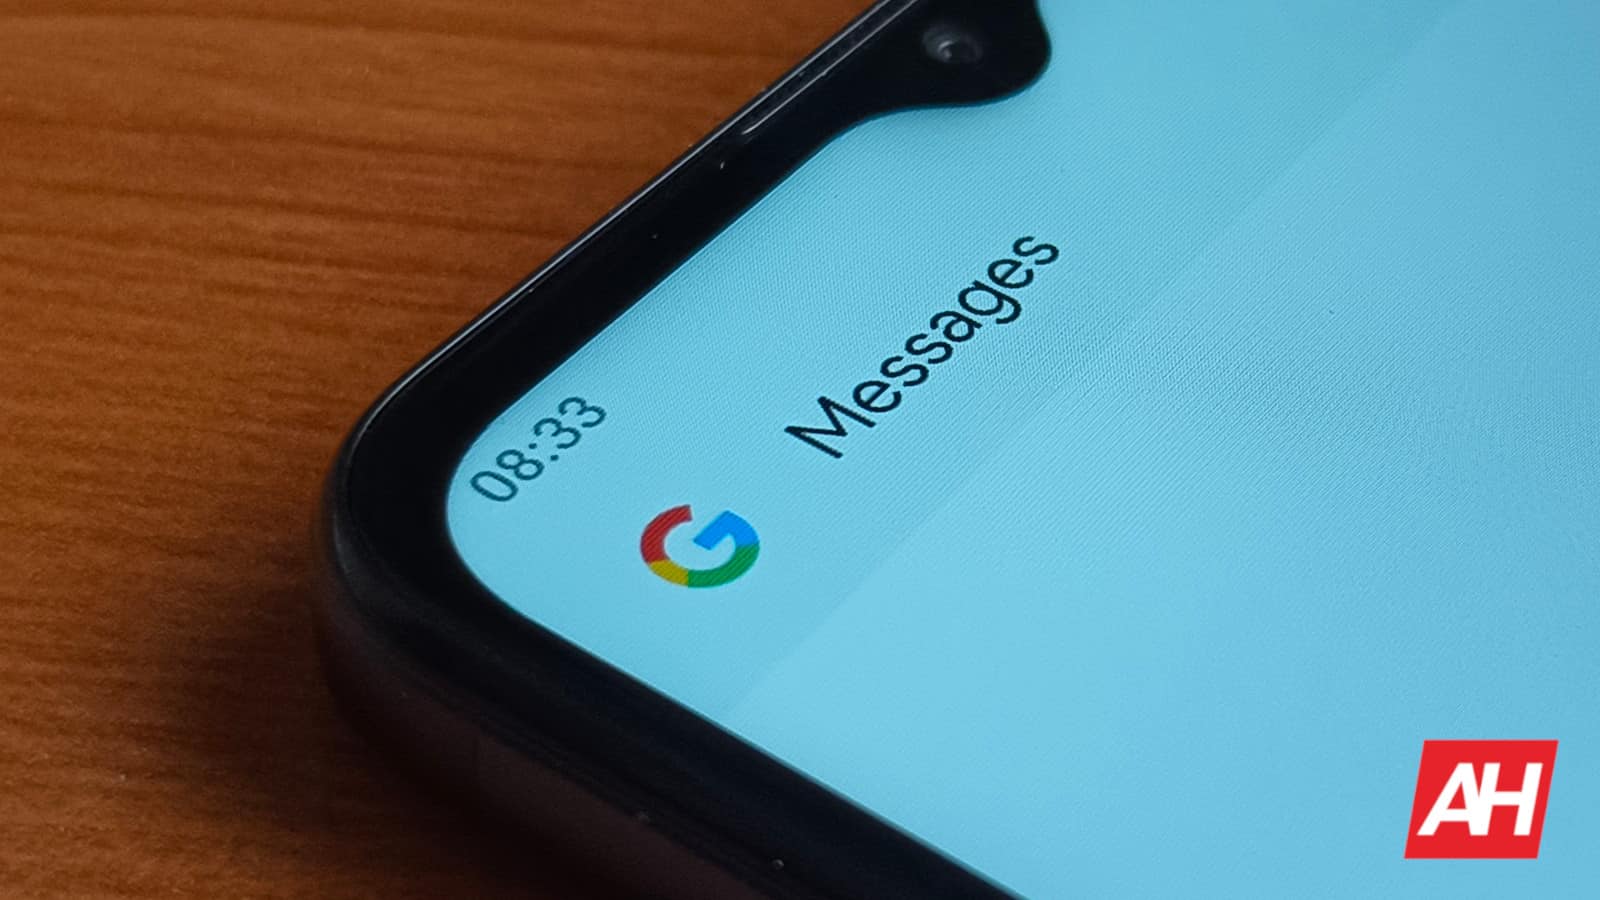 The Google Messages app now has a text editing feature in beta